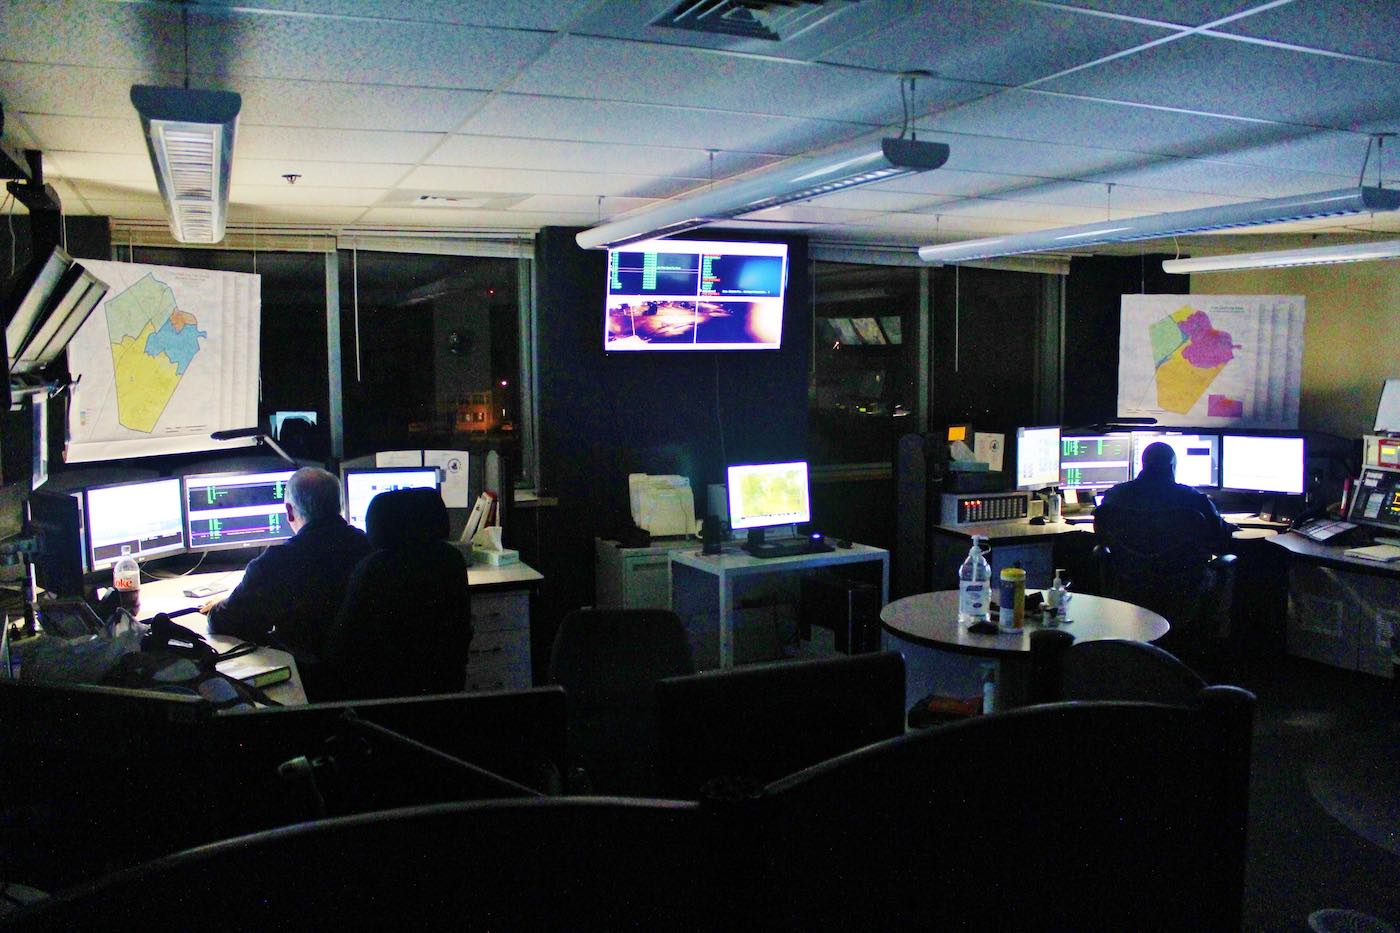 Police Dispatch room at night